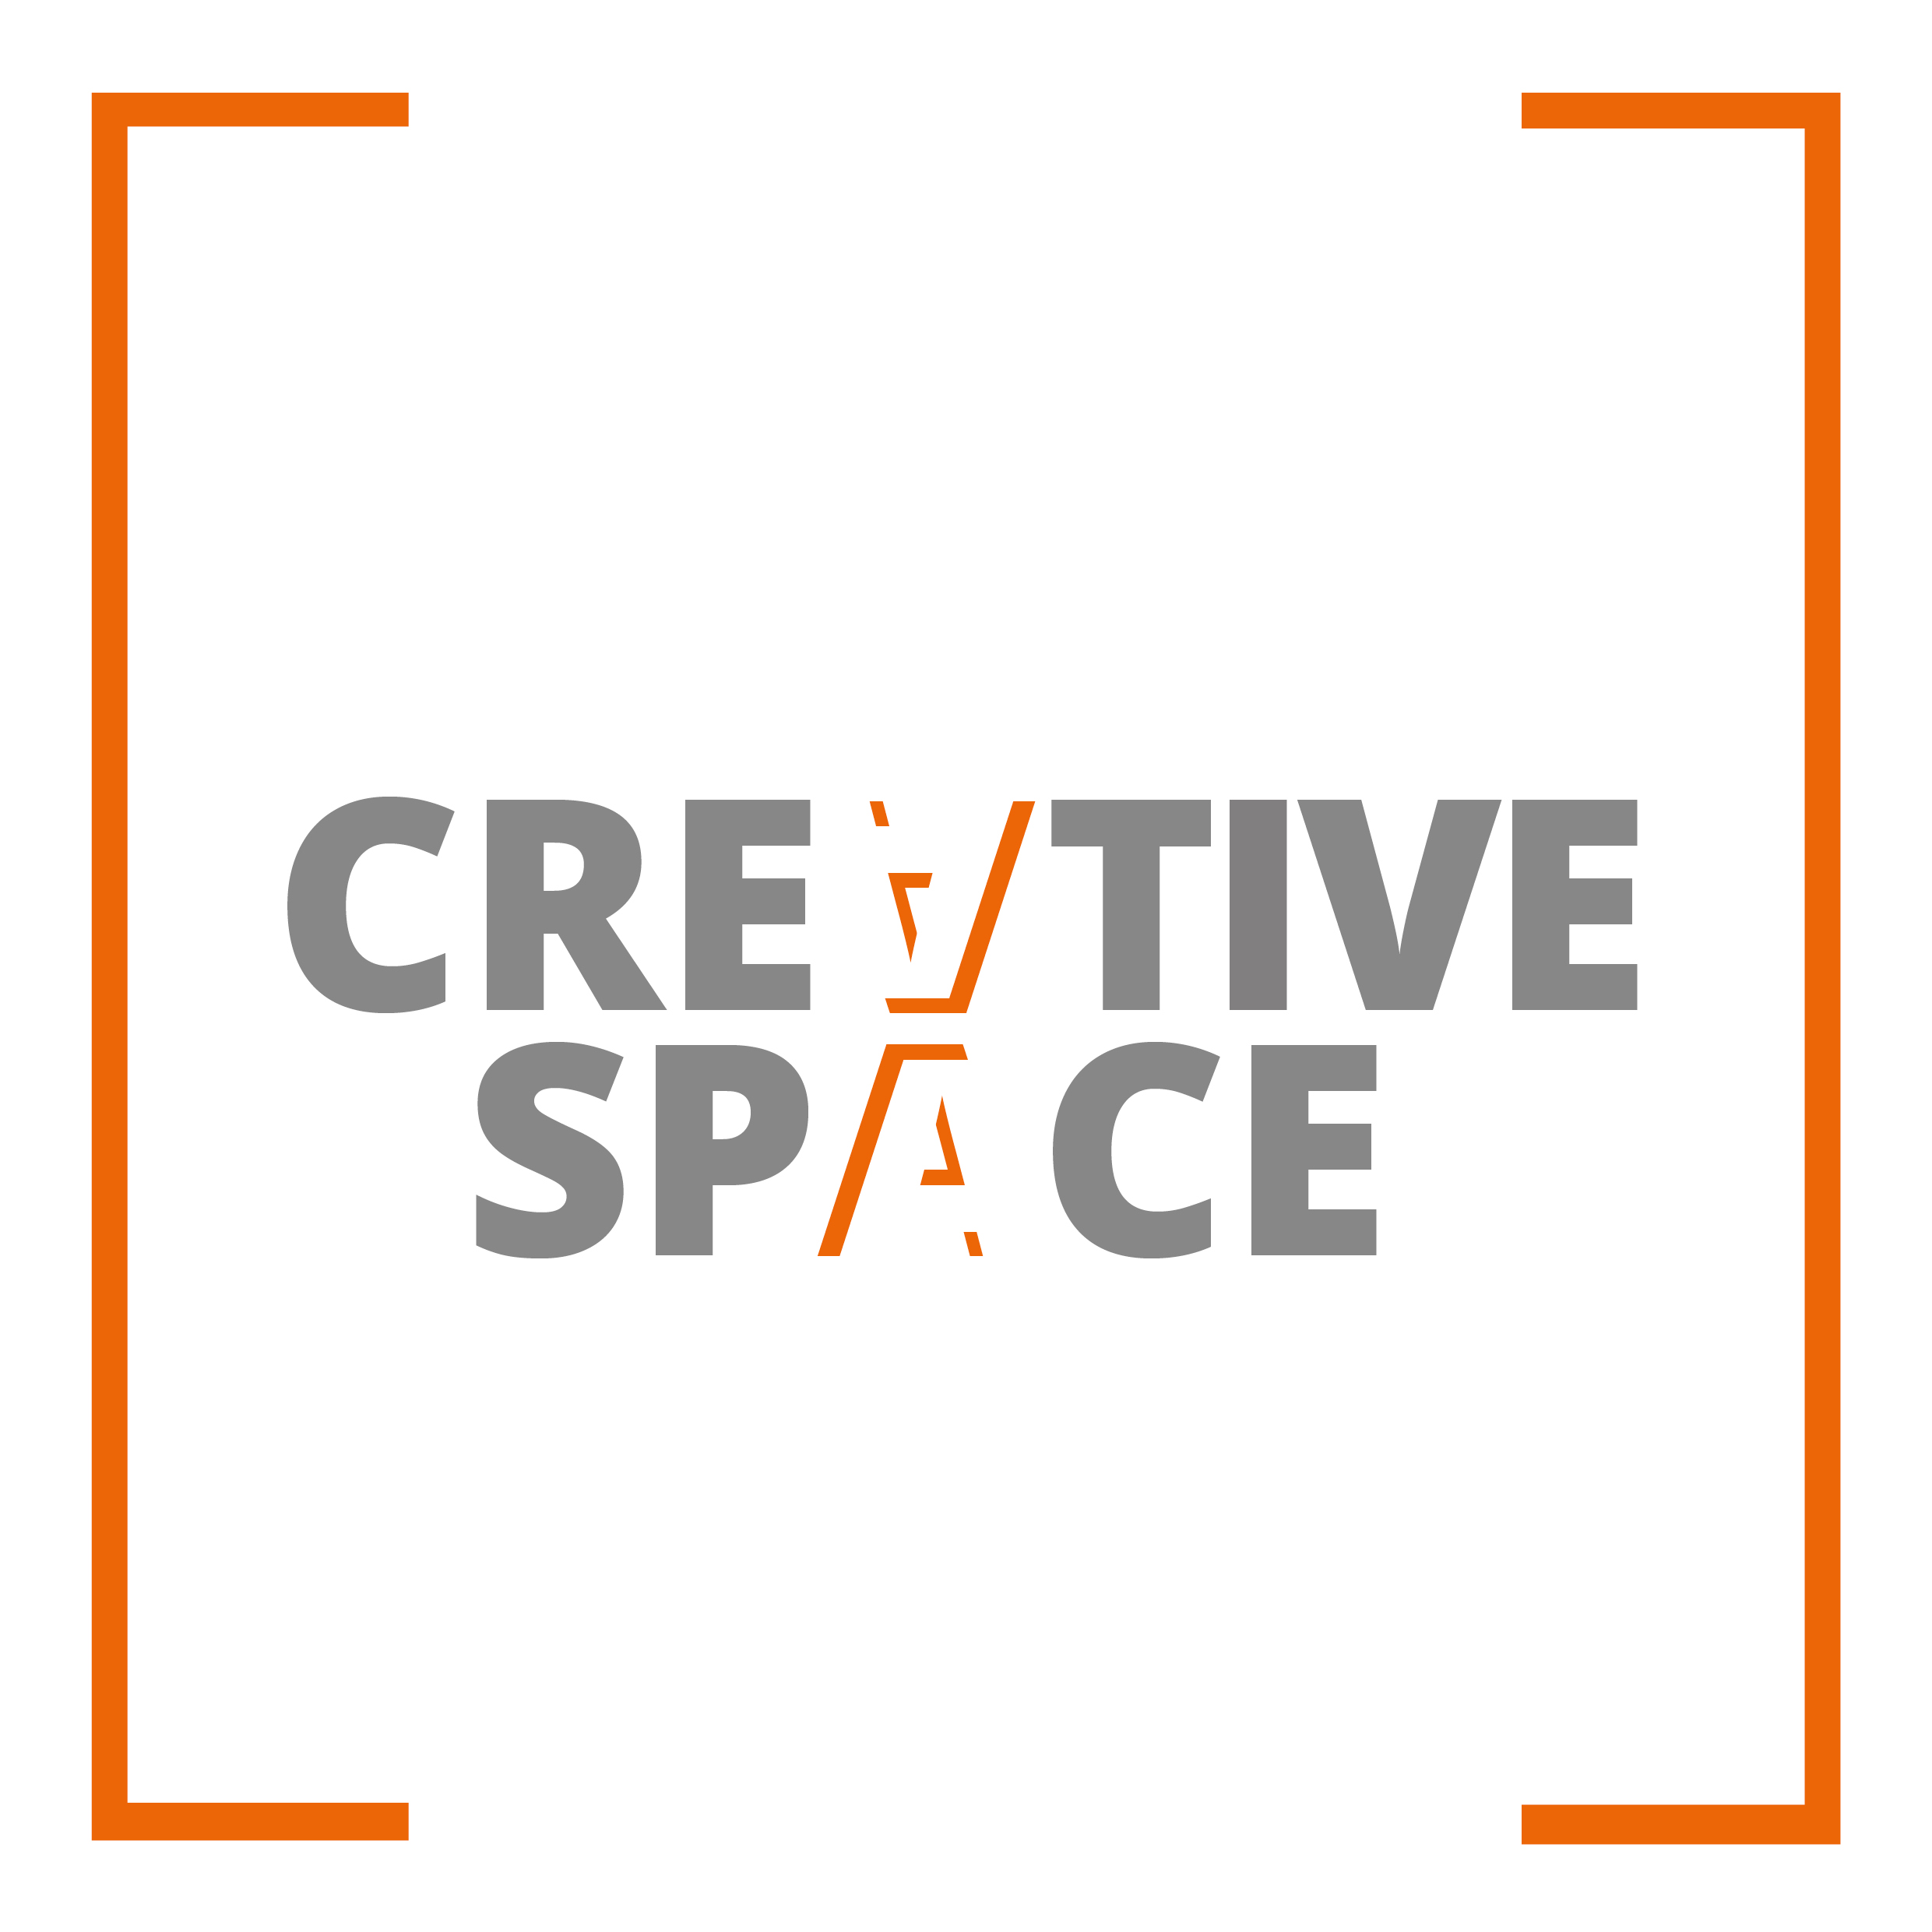 Join the CREATiVE SPACE @GE Hardt